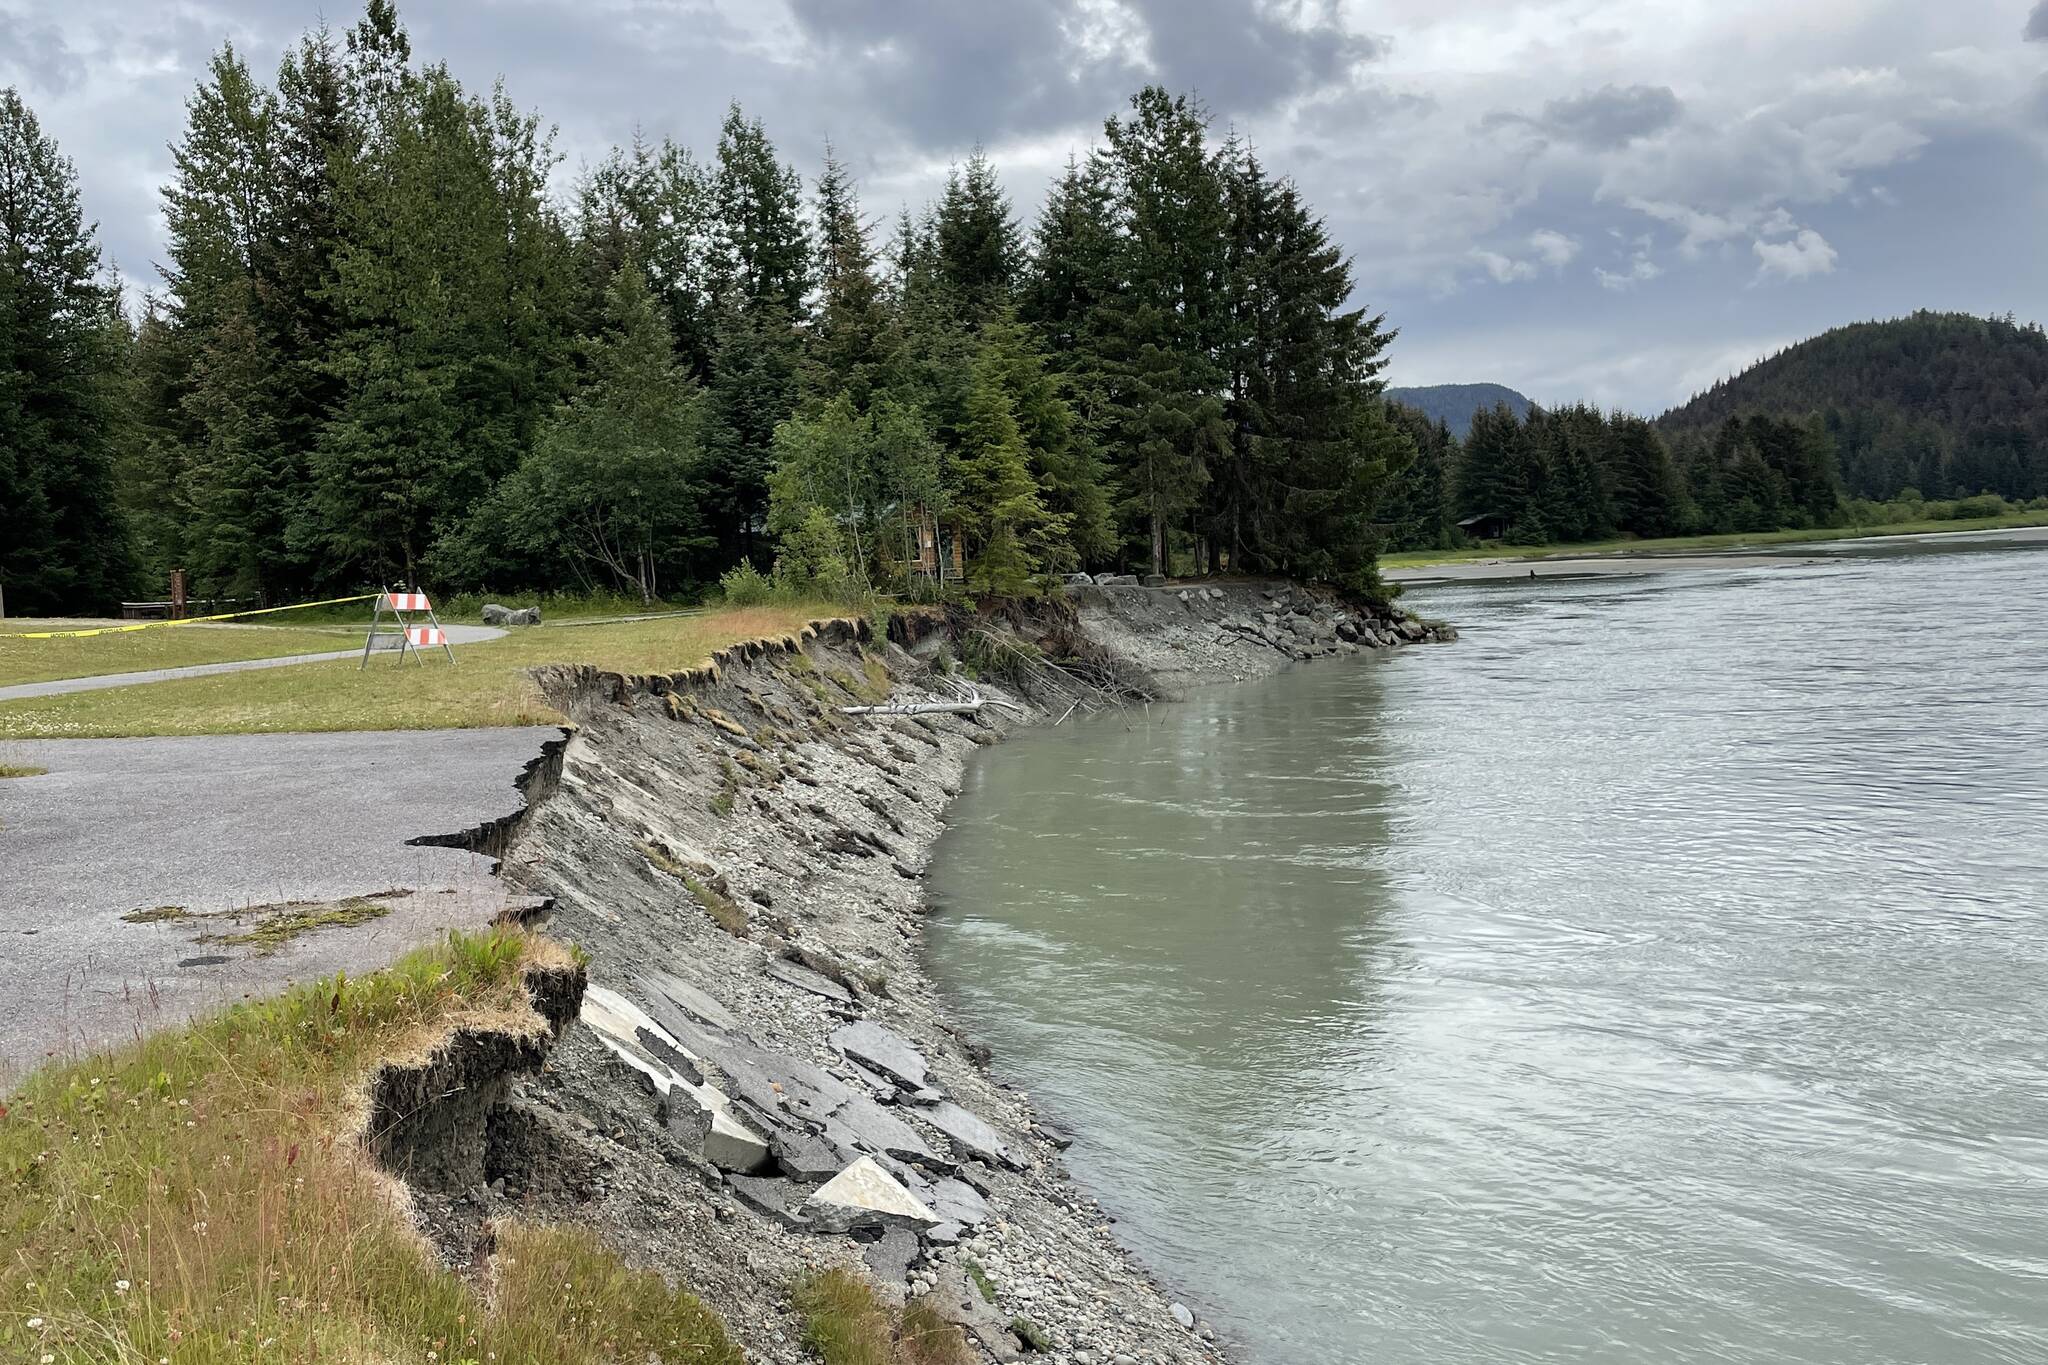 Erosion on the riverbank is threatening more and more infrastructure near Eagle Beach State Park, including a public cabin. (Michael S. Lockett / Juneau Empire)